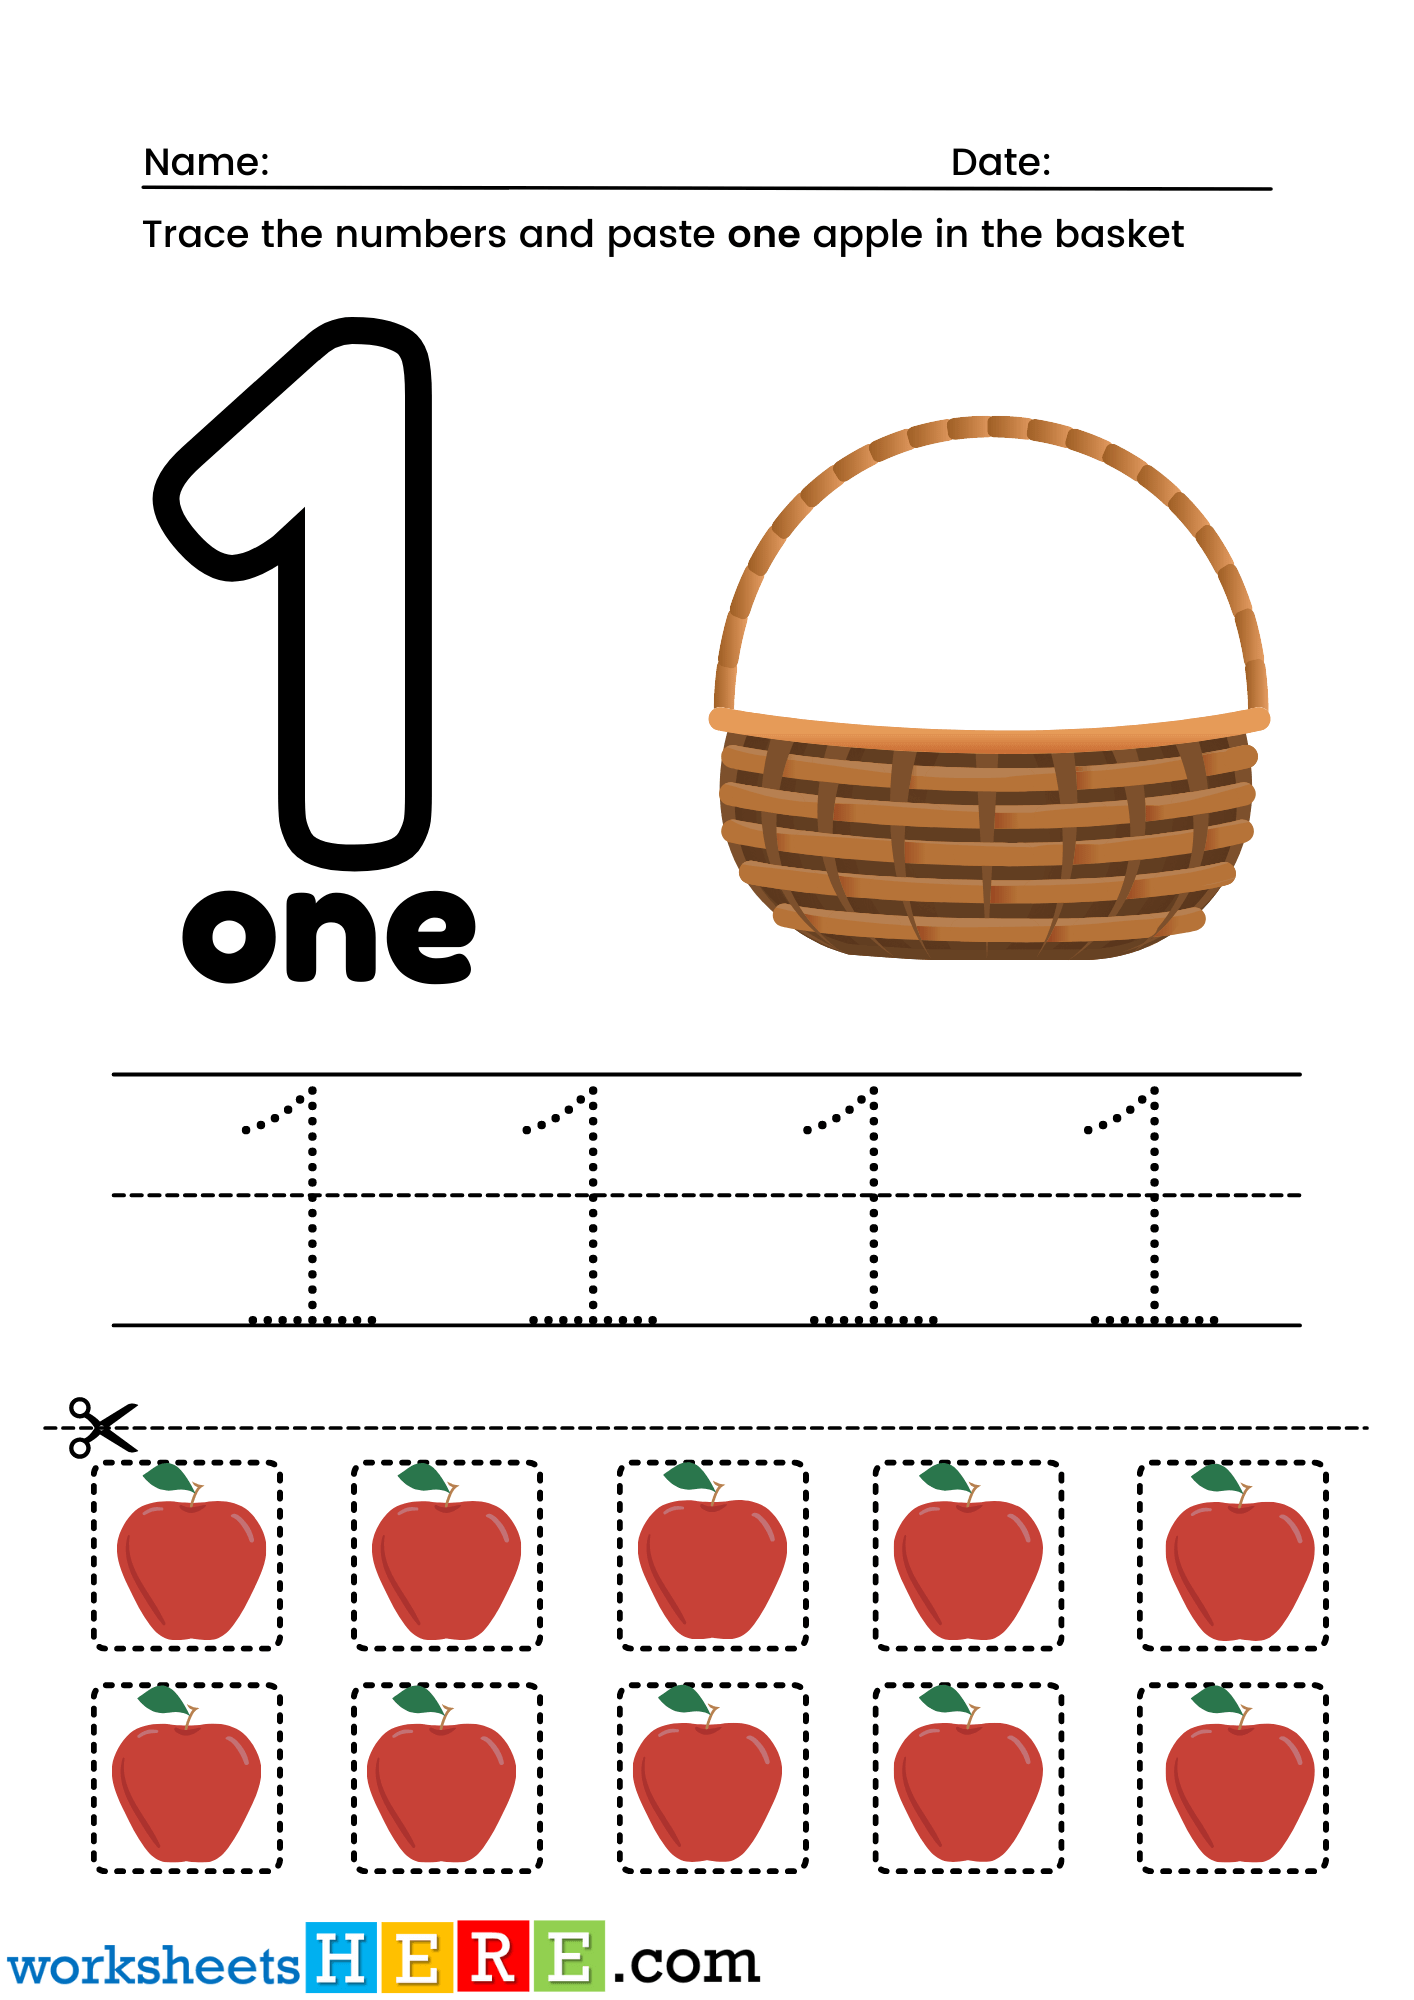 Trace Number 1, Cut and Past One Apple in the Basket PDF Worksheets For Kindergarten